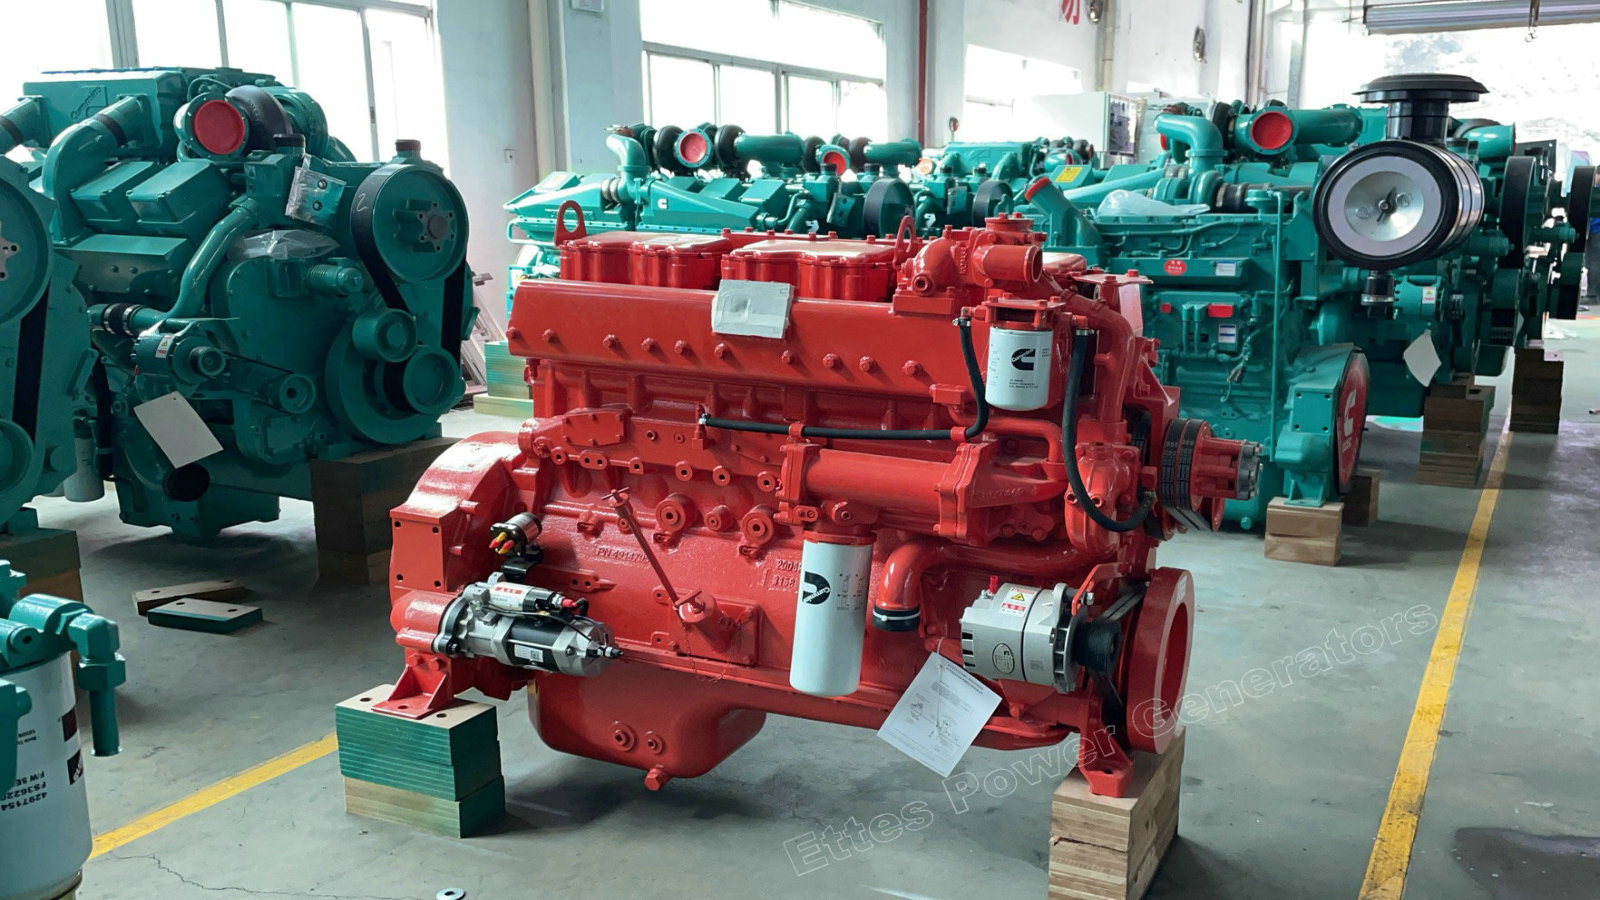 Cummins 200kW 300kW 500kW Engines available in Stock ETTES POWER